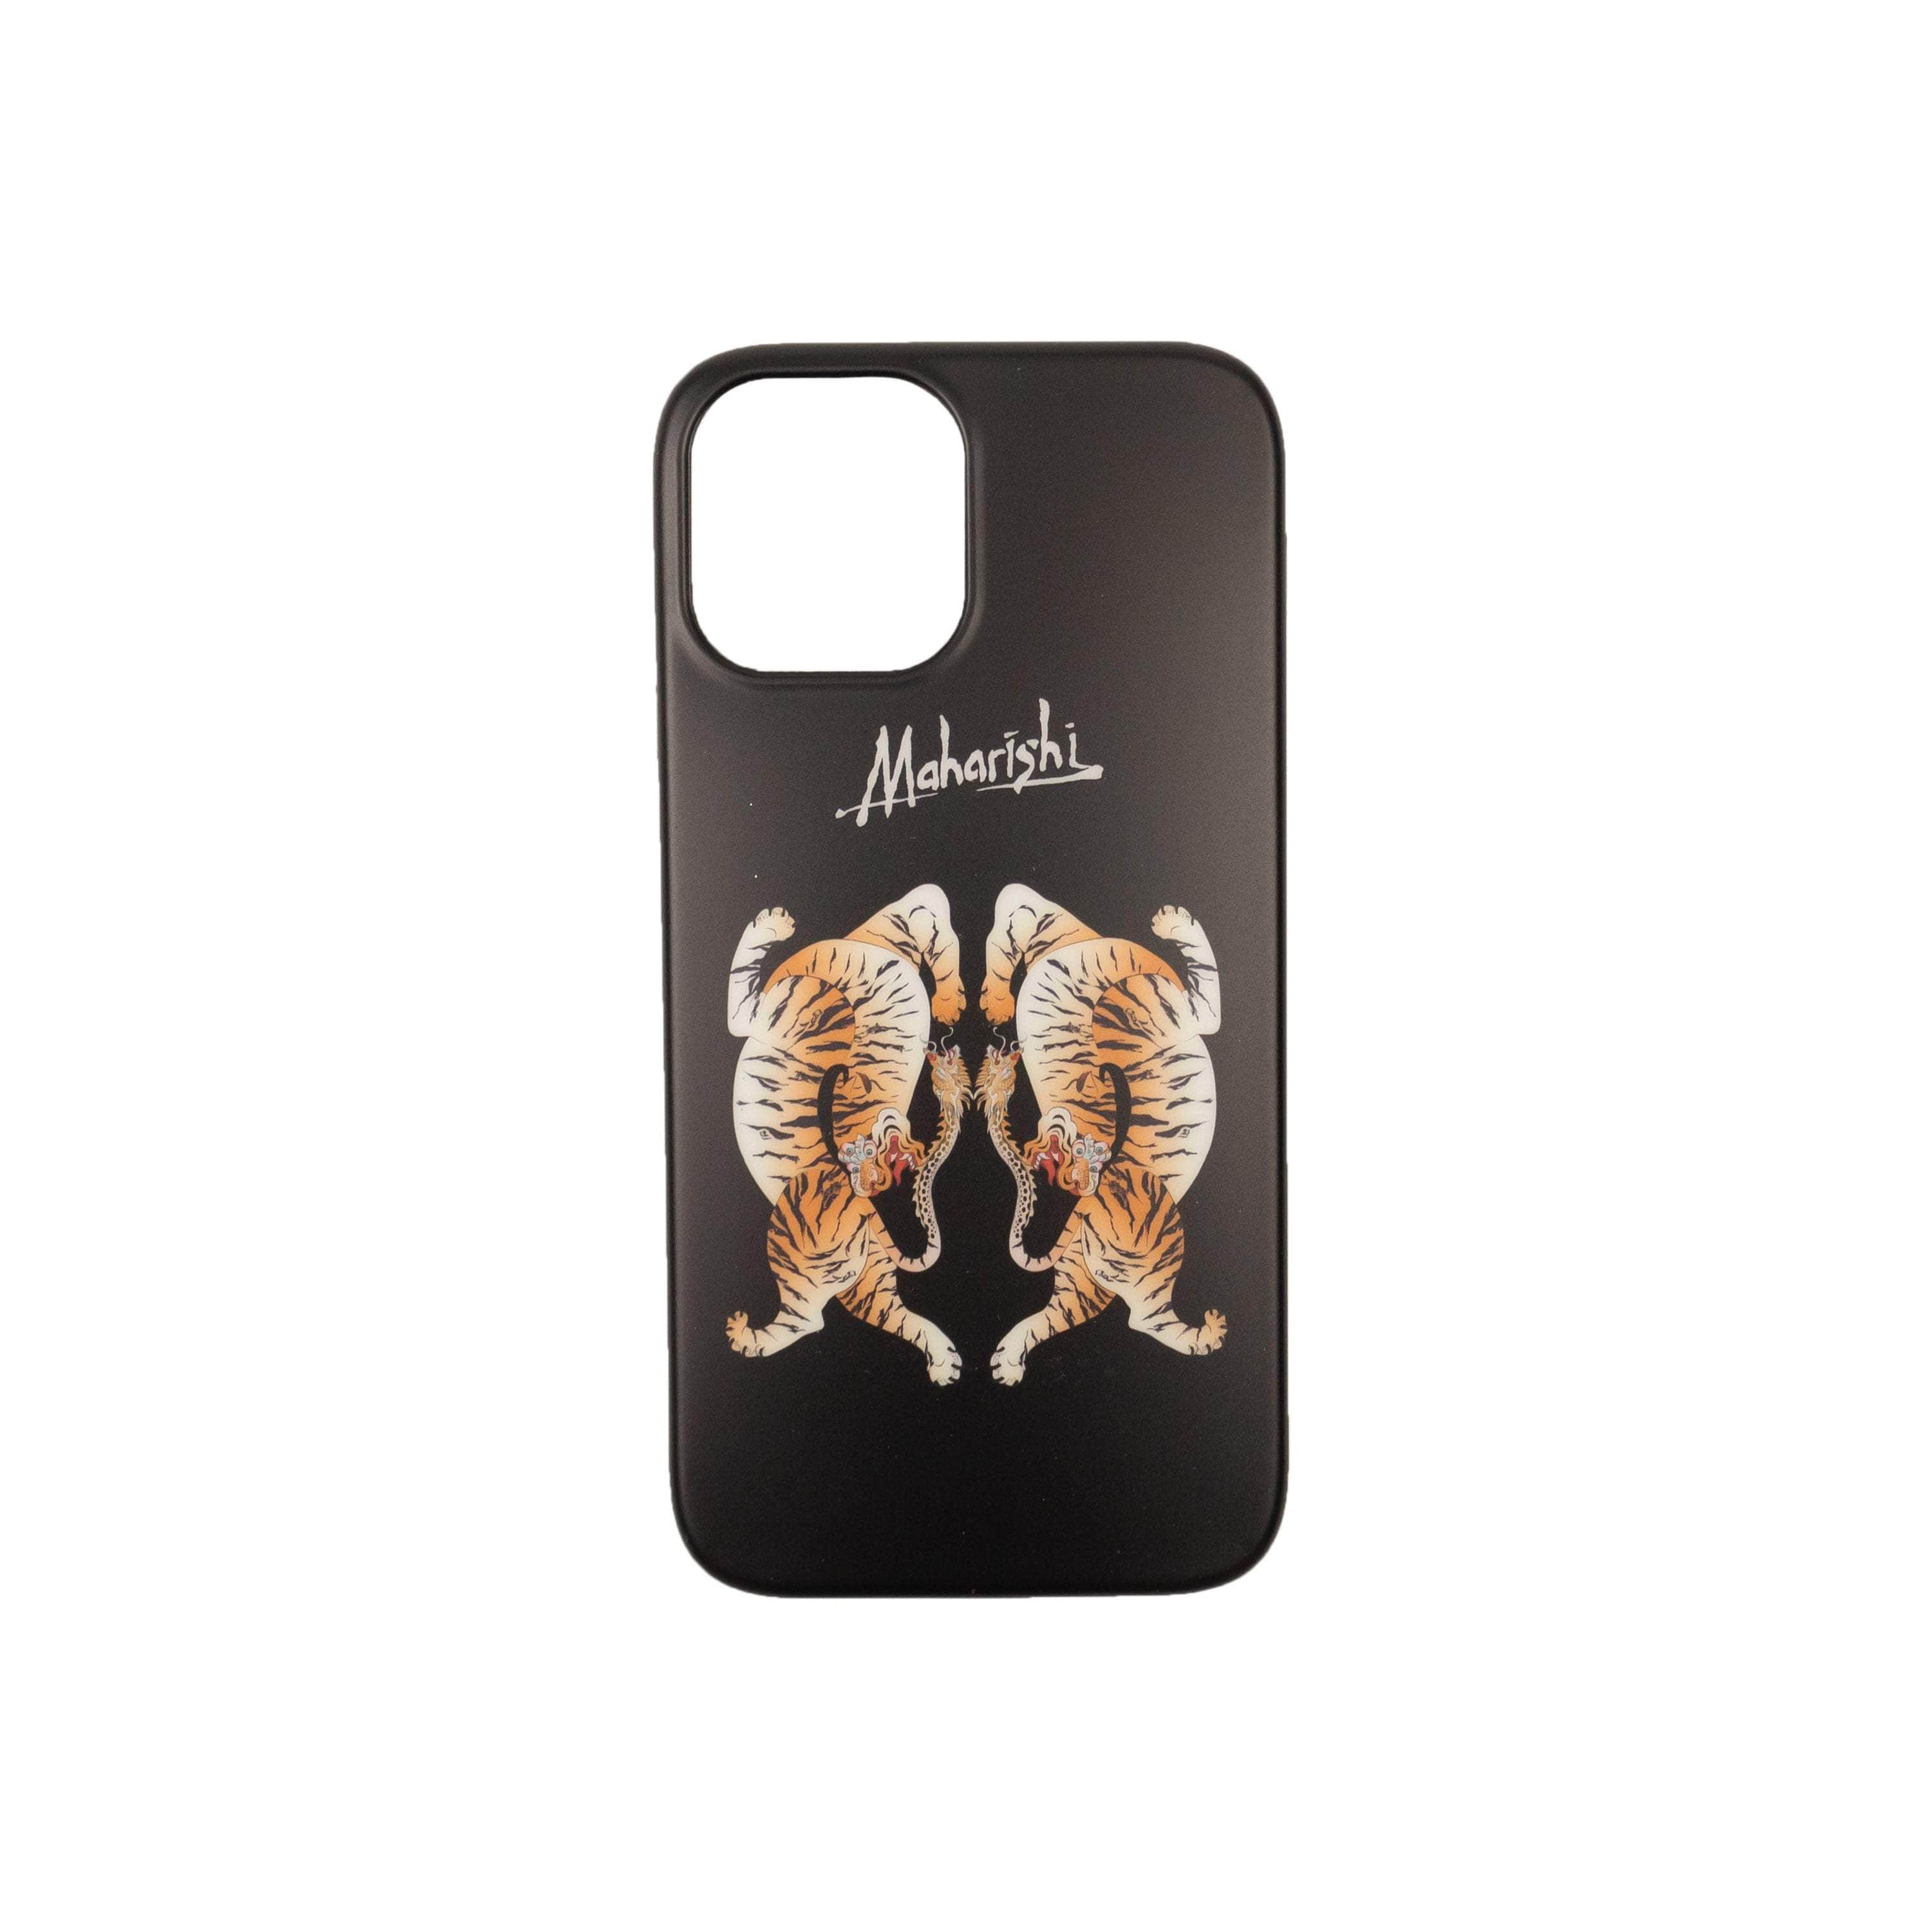 Maharishi couponcollection, gender-mens, gender-womens, maharishi, main-accessories, mens-shoes, size-os, under-250, unisex-phone-cases OS Black iPhone 12/12 Pro Tigers Phone Case 95-MSI-3003/OS 95-MSI-3003/OS